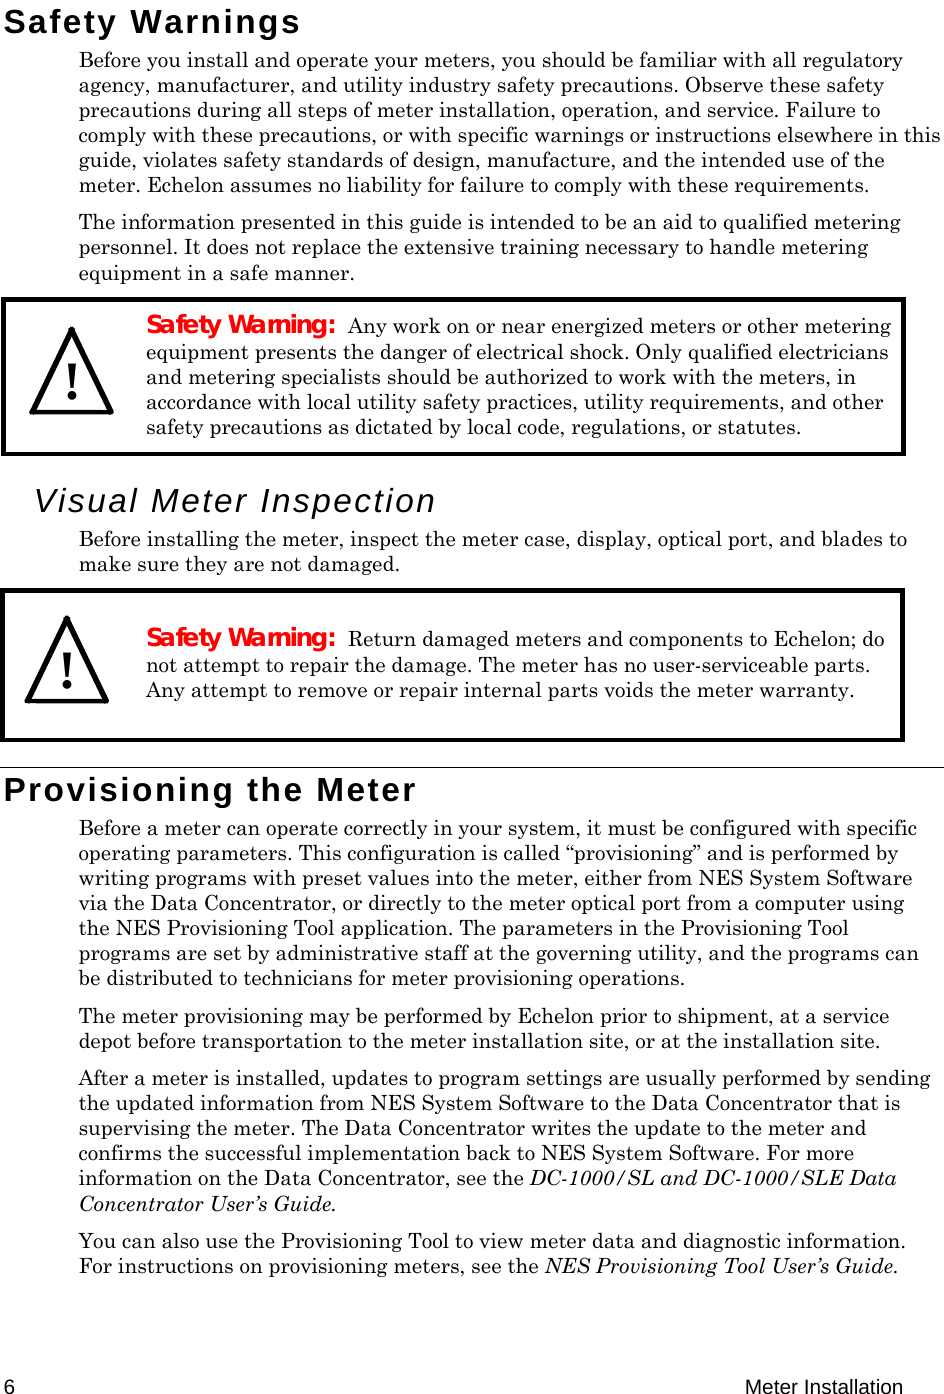  6 Meter Installation Safety Warnings Before you install and operate your meters, you should be familiar with all regulatory agency, manufacturer, and utility industry safety precautions. Observe these safety precautions during all steps of meter installation, operation, and service. Failure to comply with these precautions, or with specific warnings or instructions elsewhere in this guide, violates safety standards of design, manufacture, and the intended use of the meter. Echelon assumes no liability for failure to comply with these requirements. The information presented in this guide is intended to be an aid to qualified metering personnel. It does not replace the extensive training necessary to handle metering equipment in a safe manner.   Safety Warning:  Any work on or near energized meters or other metering equipment presents the danger of electrical shock. Only qualified electricians and metering specialists should be authorized to work with the meters, in accordance with local utility safety practices, utility requirements, and other safety precautions as dictated by local code, regulations, or statutes. Visual Meter Inspection Before installing the meter, inspect the meter case, display, optical port, and blades to make sure they are not damaged.  Safety Warning:  Return damaged meters and components to Echelon; do not attempt to repair the damage. The meter has no user-serviceable parts. Any attempt to remove or repair internal parts voids the meter warranty. Provisioning the Meter  Before a meter can operate correctly in your system, it must be configured with specific operating parameters. This configuration is called “provisioning” and is performed by writing programs with preset values into the meter, either from NES System Software via the Data Concentrator, or directly to the meter optical port from a computer using the NES Provisioning Tool application. The parameters in the Provisioning Tool programs are set by administrative staff at the governing utility, and the programs can be distributed to technicians for meter provisioning operations. The meter provisioning may be performed by Echelon prior to shipment, at a service depot before transportation to the meter installation site, or at the installation site.  After a meter is installed, updates to program settings are usually performed by sending the updated information from NES System Software to the Data Concentrator that is supervising the meter. The Data Concentrator writes the update to the meter and confirms the successful implementation back to NES System Software. For more information on the Data Concentrator, see the DC-1000/SL and DC-1000/SLE Data Concentrator User’s Guide. You can also use the Provisioning Tool to view meter data and diagnostic information. For instructions on provisioning meters, see the NES Provisioning Tool User’s Guide.   !  ! 